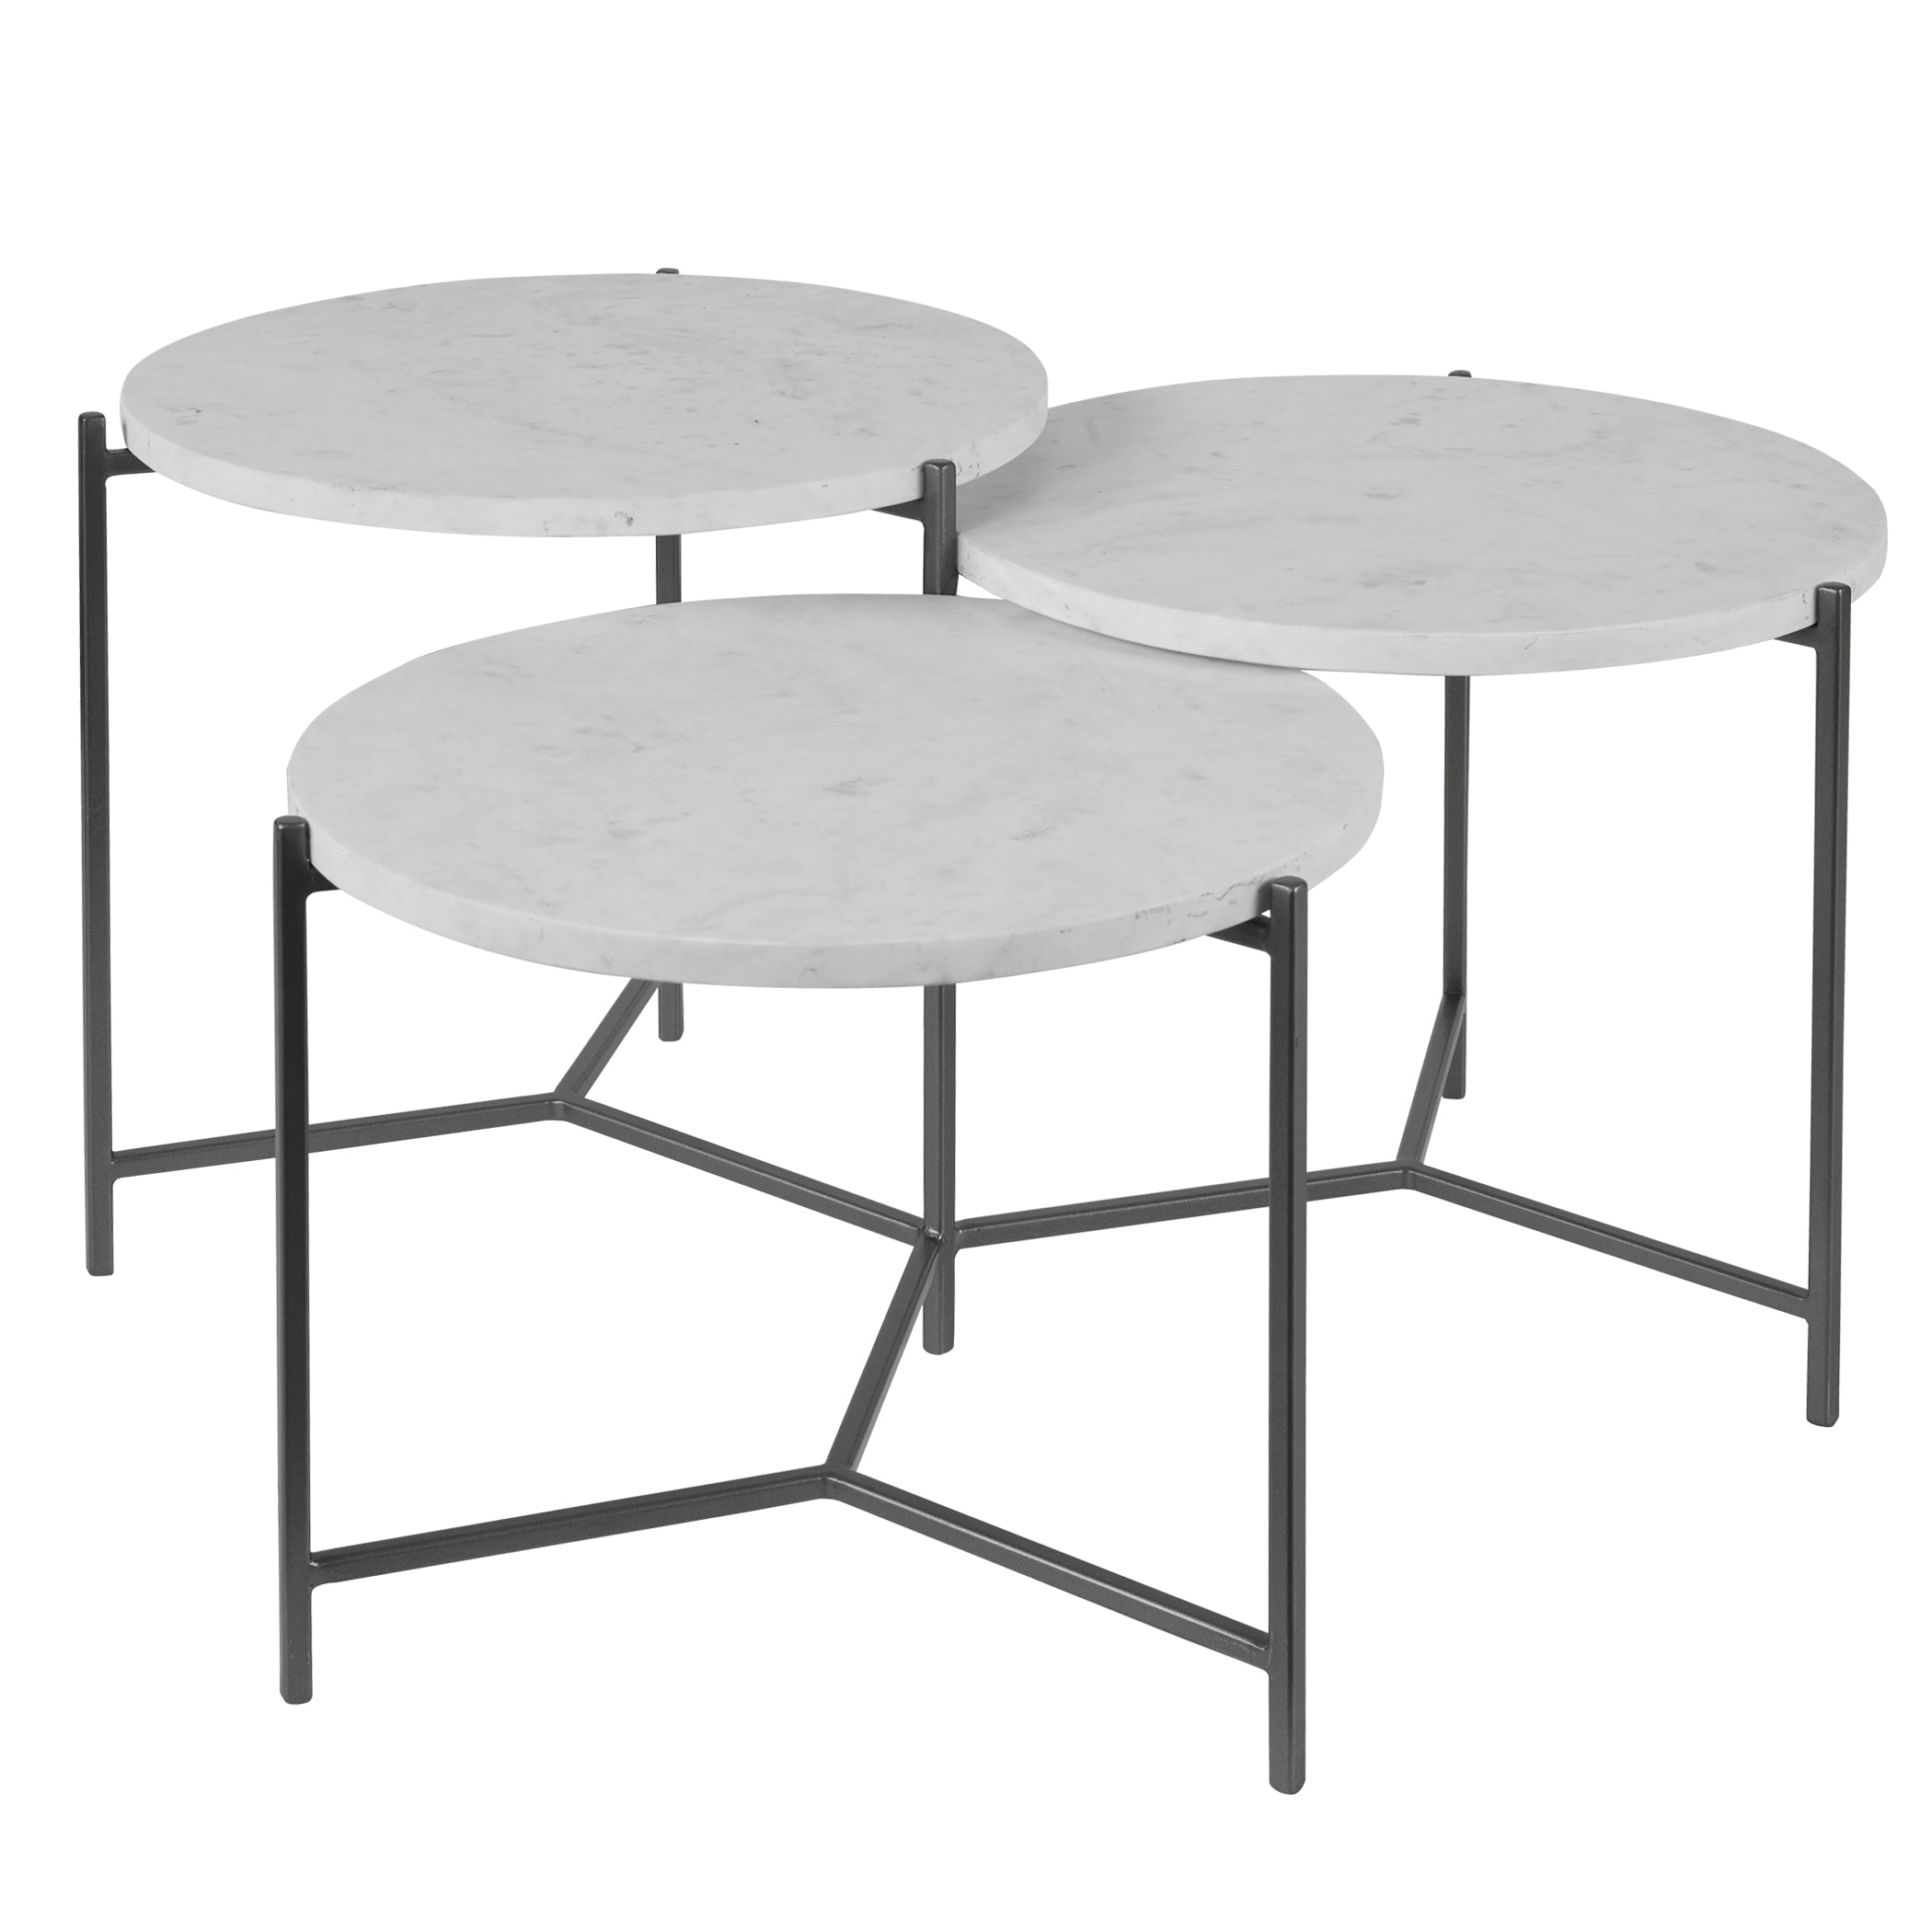 Uttermost Contarini Cocktail & Coffee Tables Cocktail & Coffee Tables Uttermost   